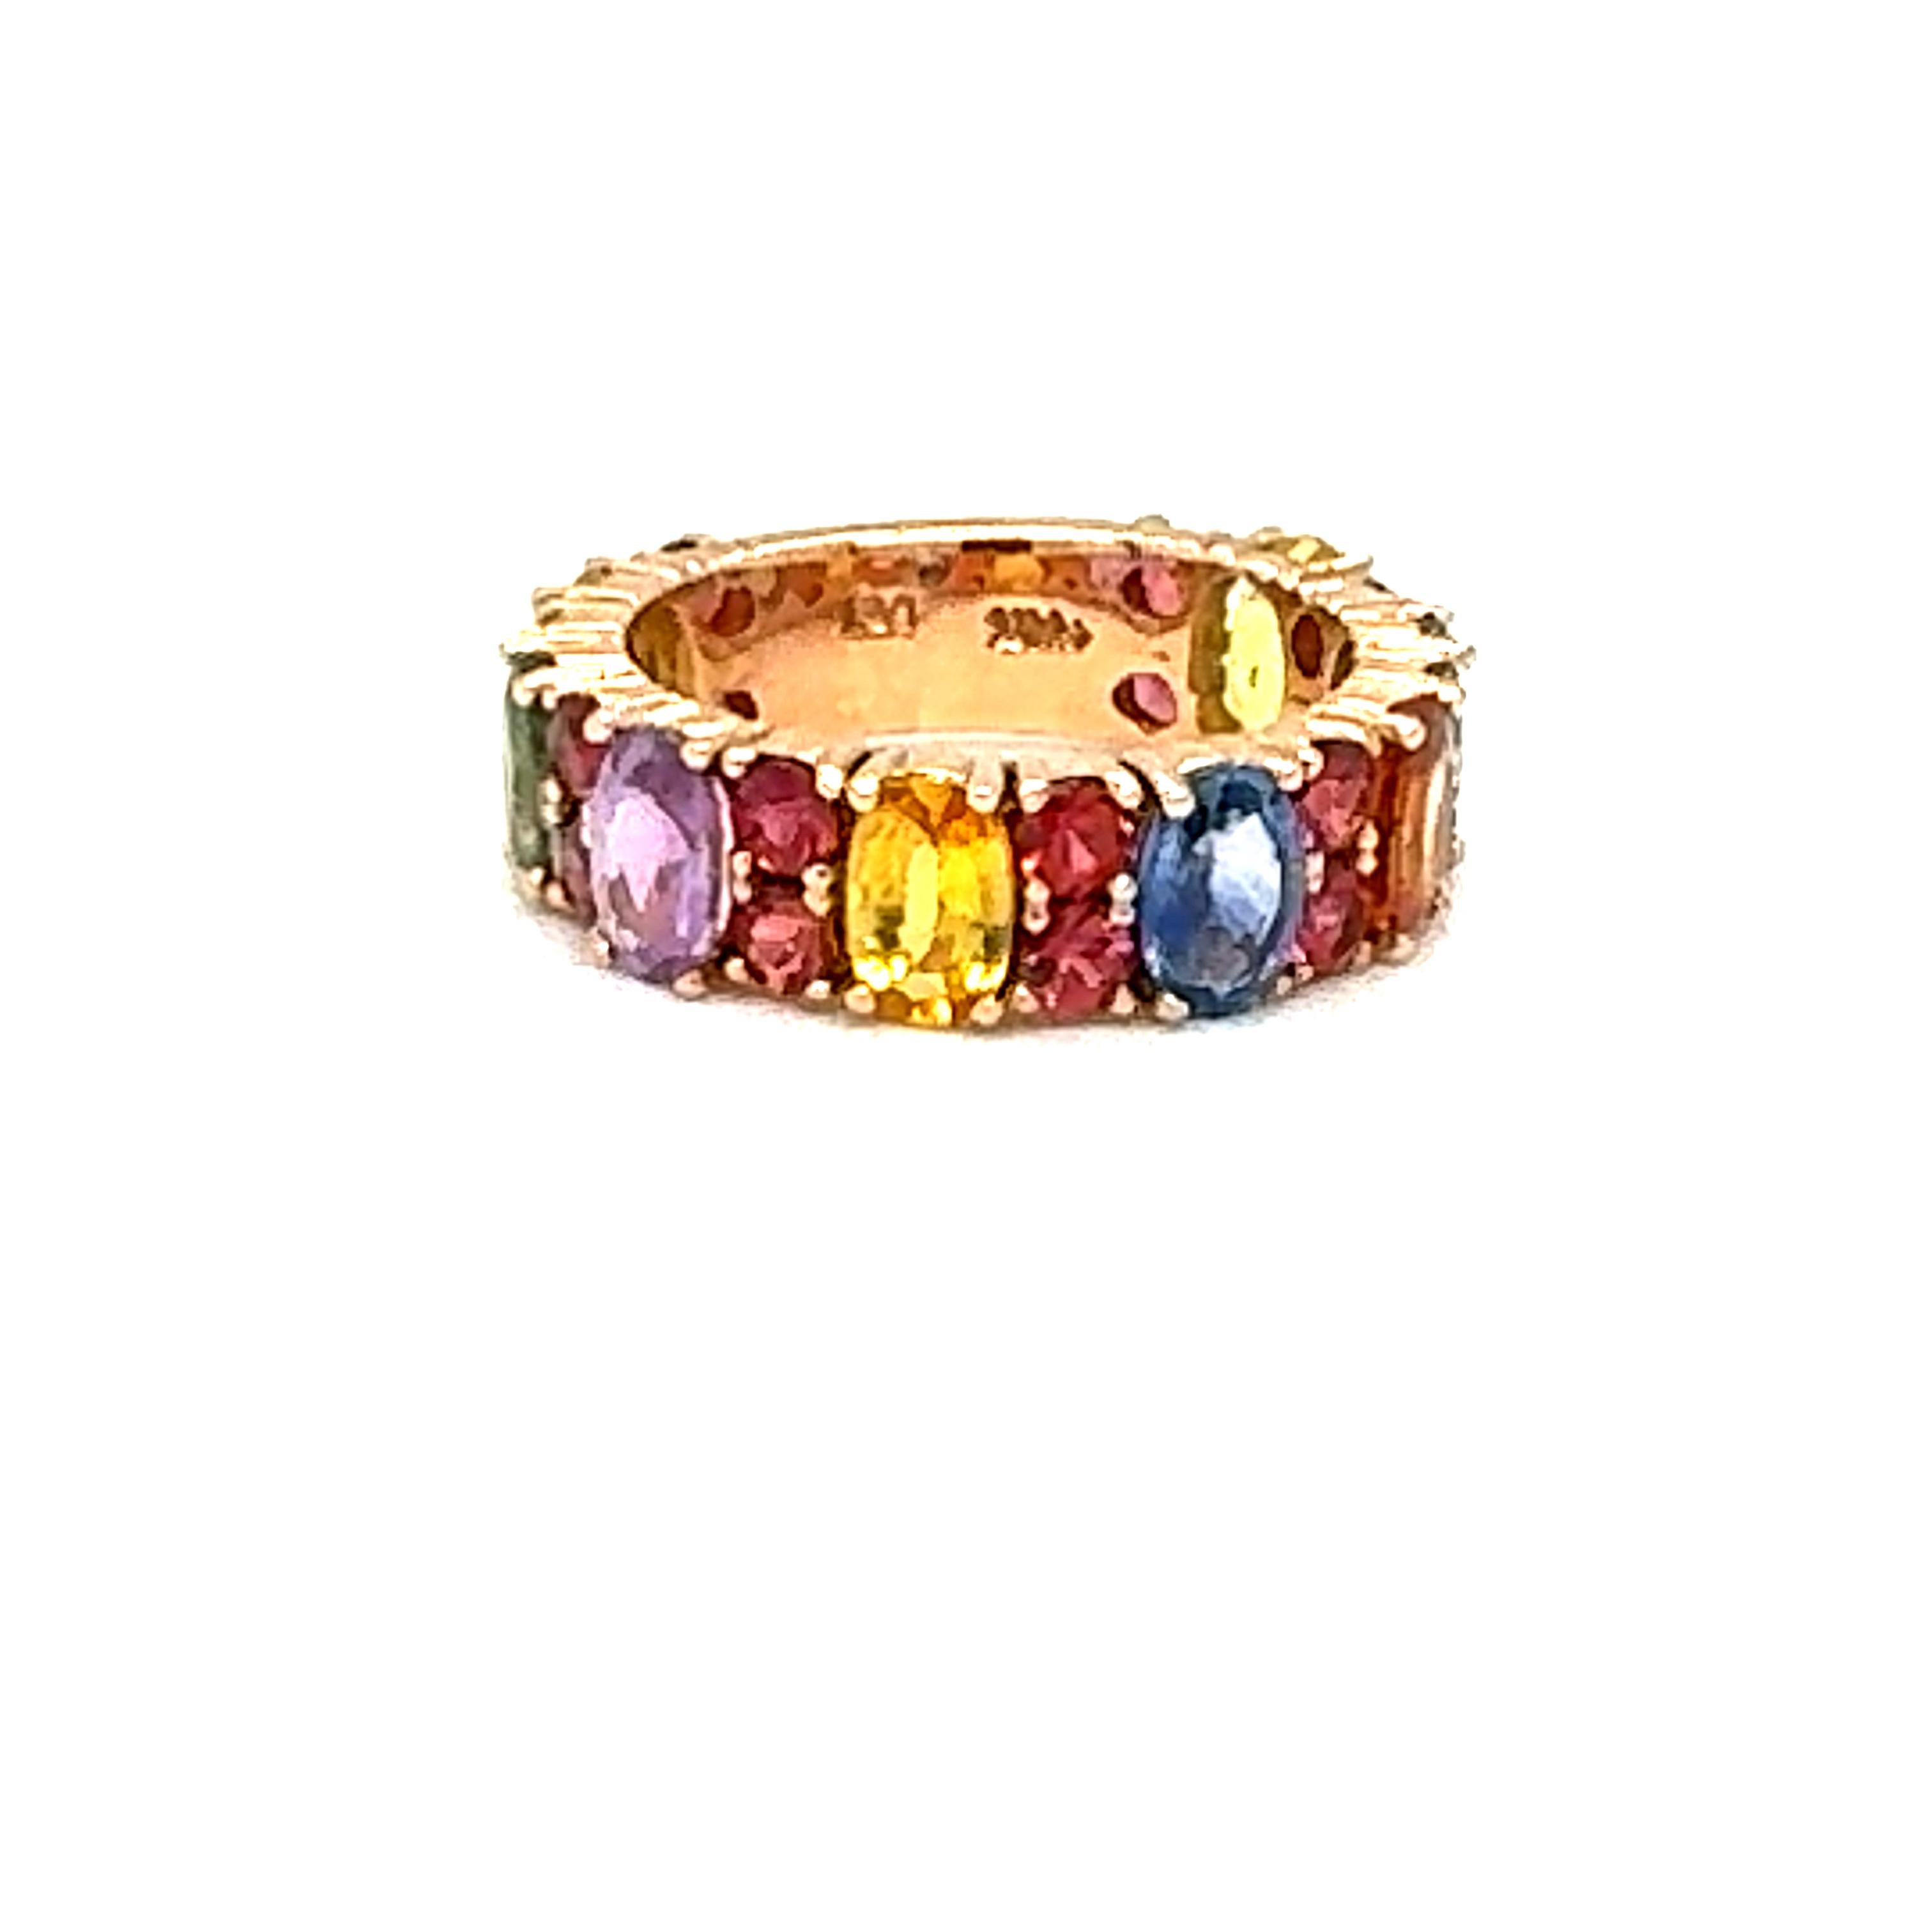 6.30 Carat Multi-Color Sapphire Rose Gold Band

There are 24 Multi-color Natural Oval and Round Cut Sapphires in this band that weigh 6.30 Carats.  It is made in 14K Rose Gold and weighs approximately 4.8 Grams.

The band is a size 7 and can be